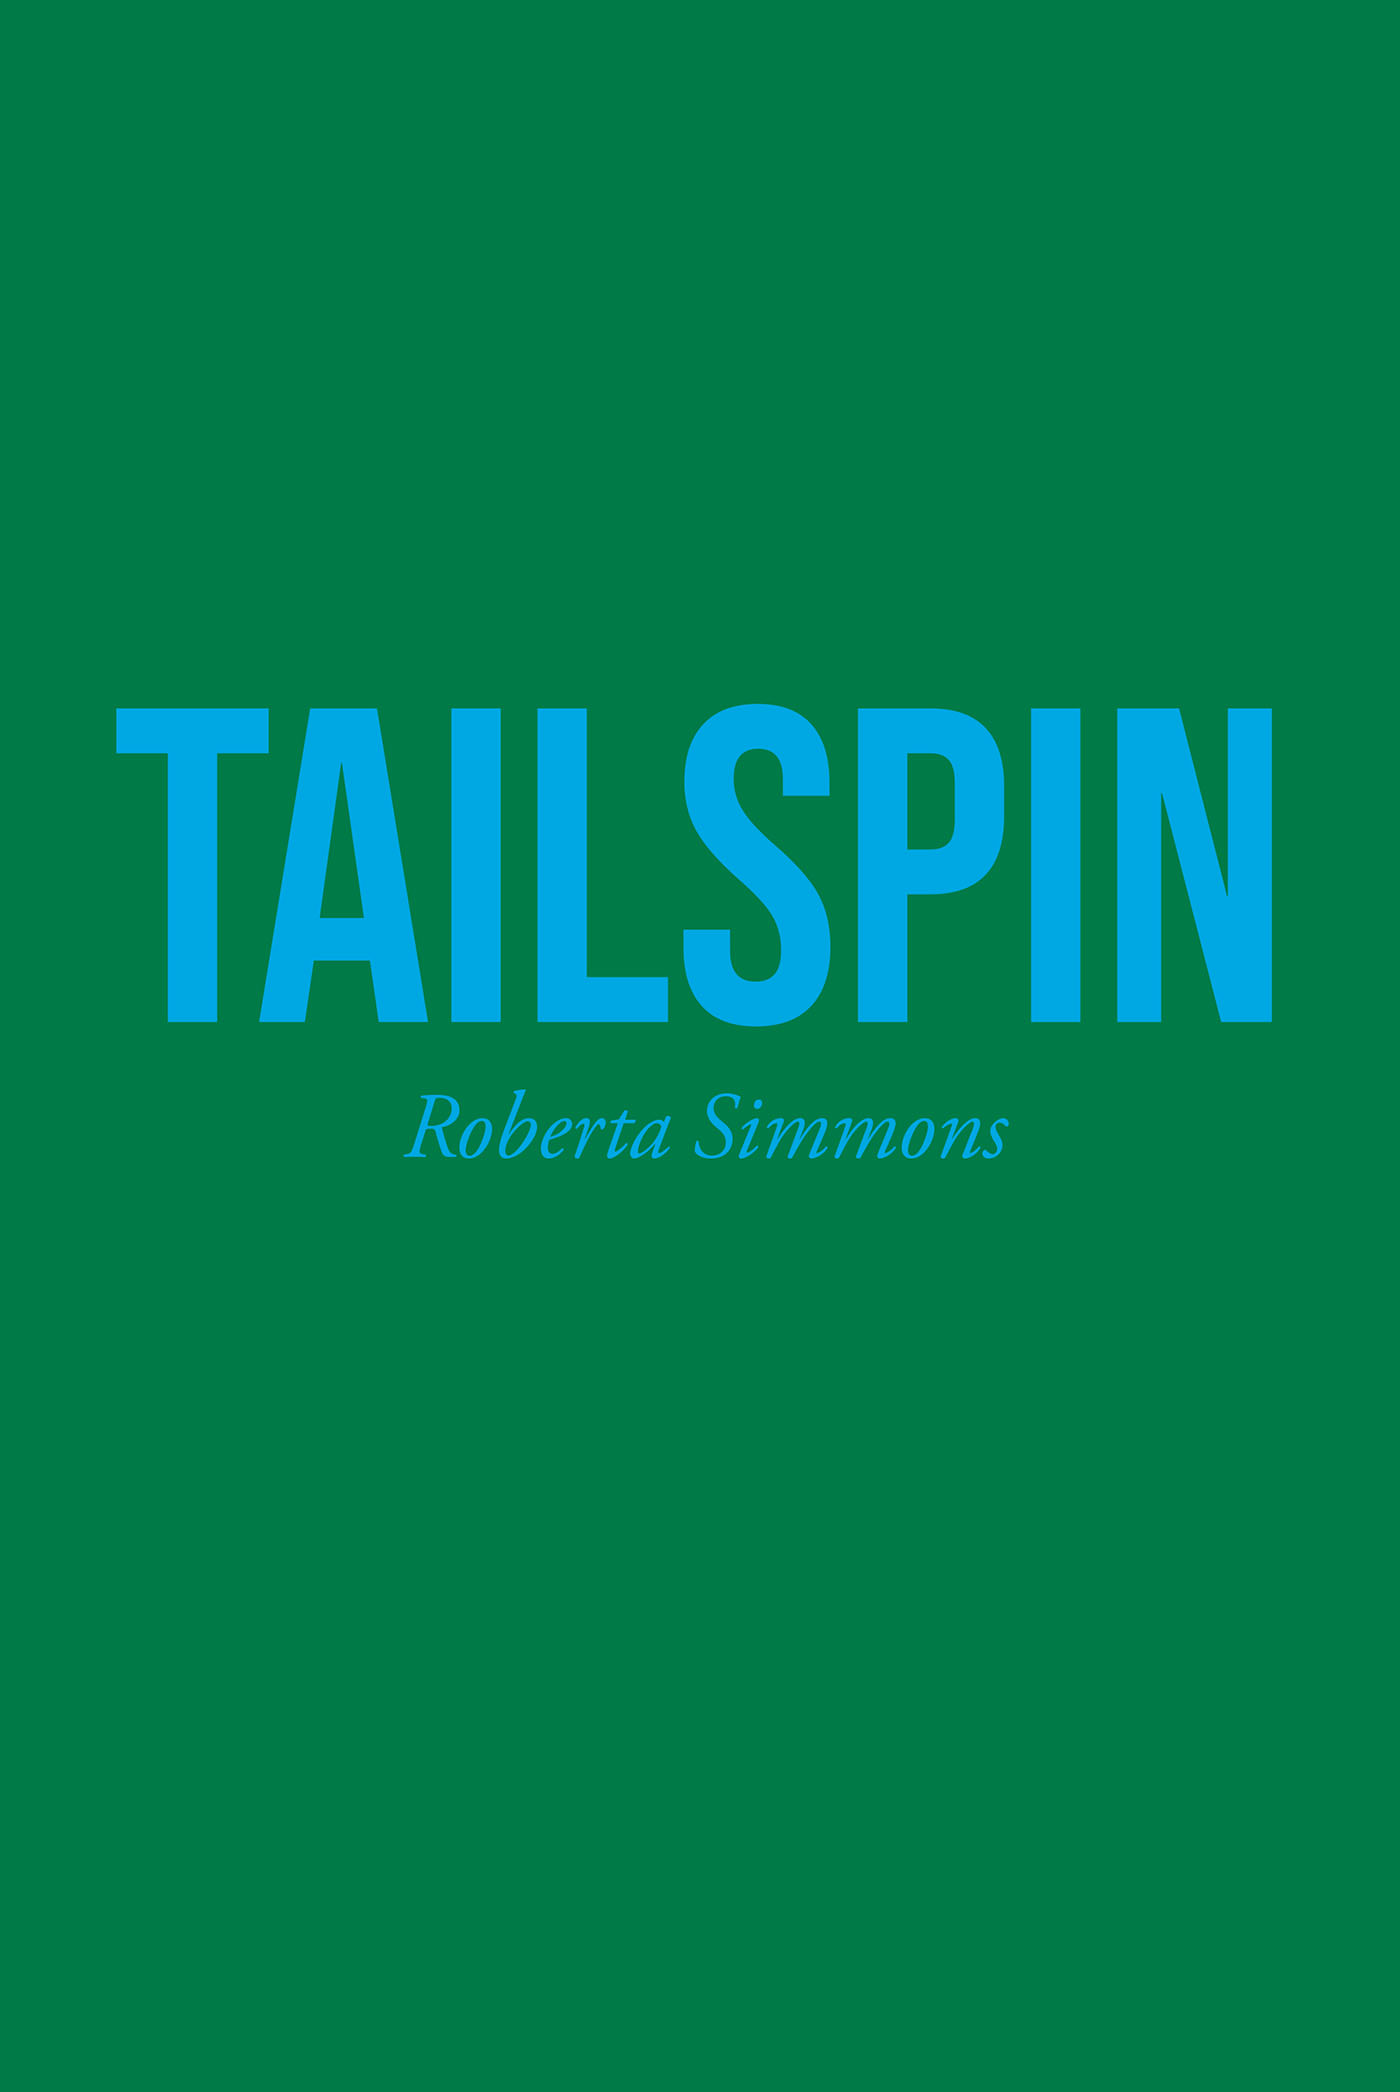 Tailspin Cover Image